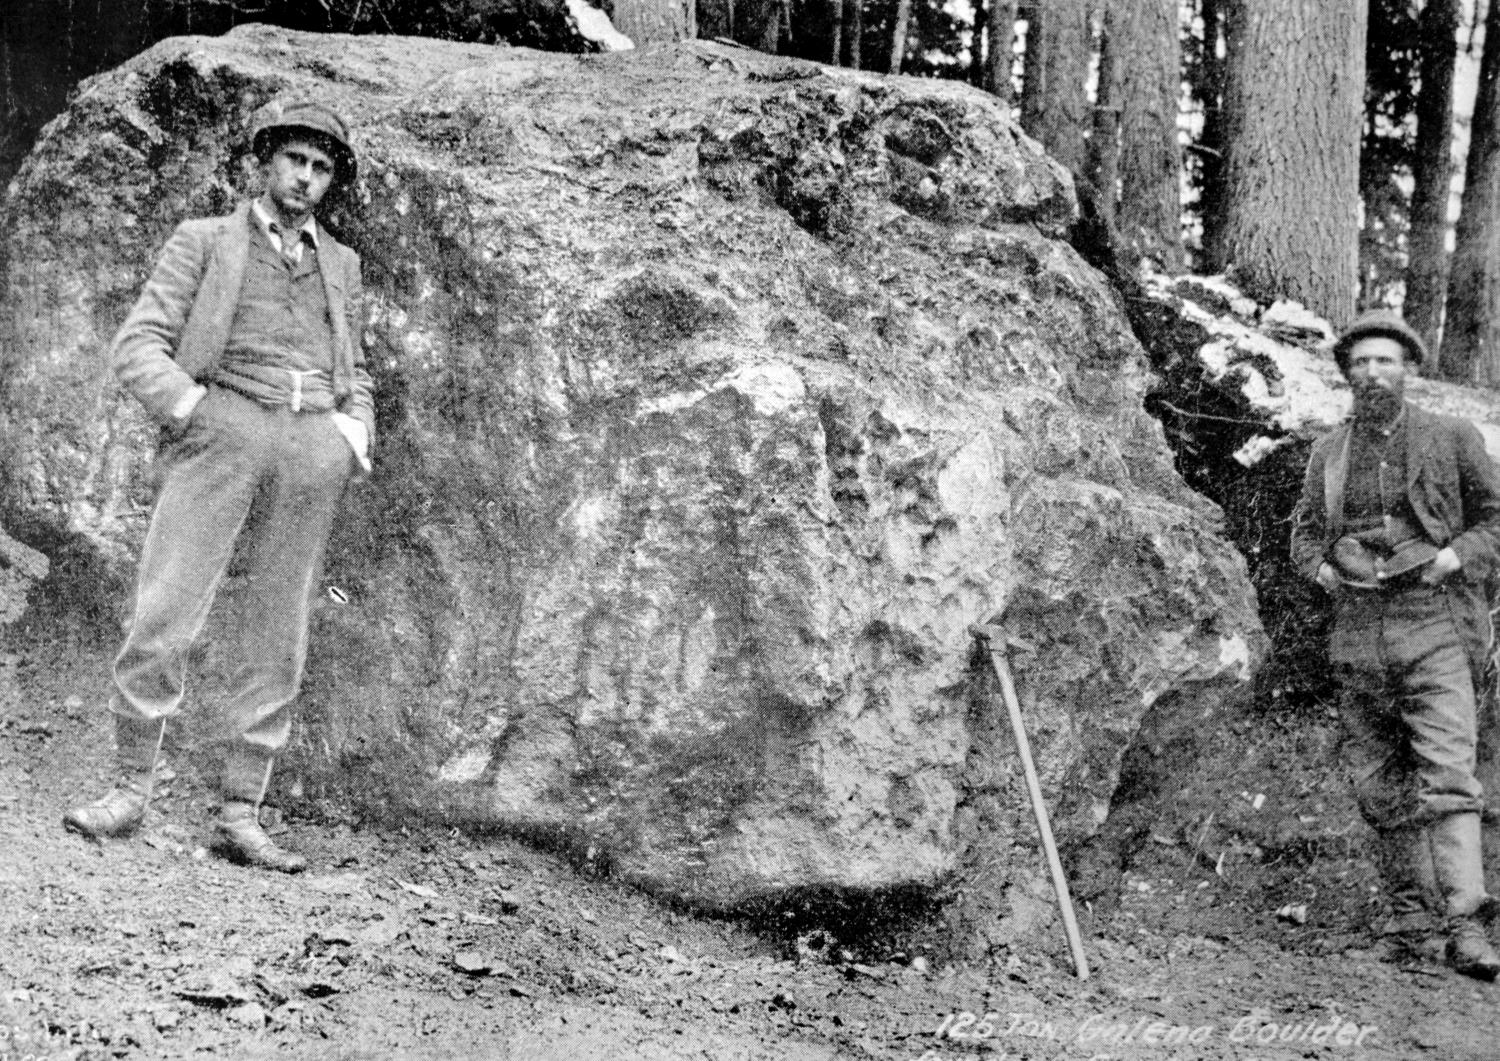 Two men stand with a giant boulder